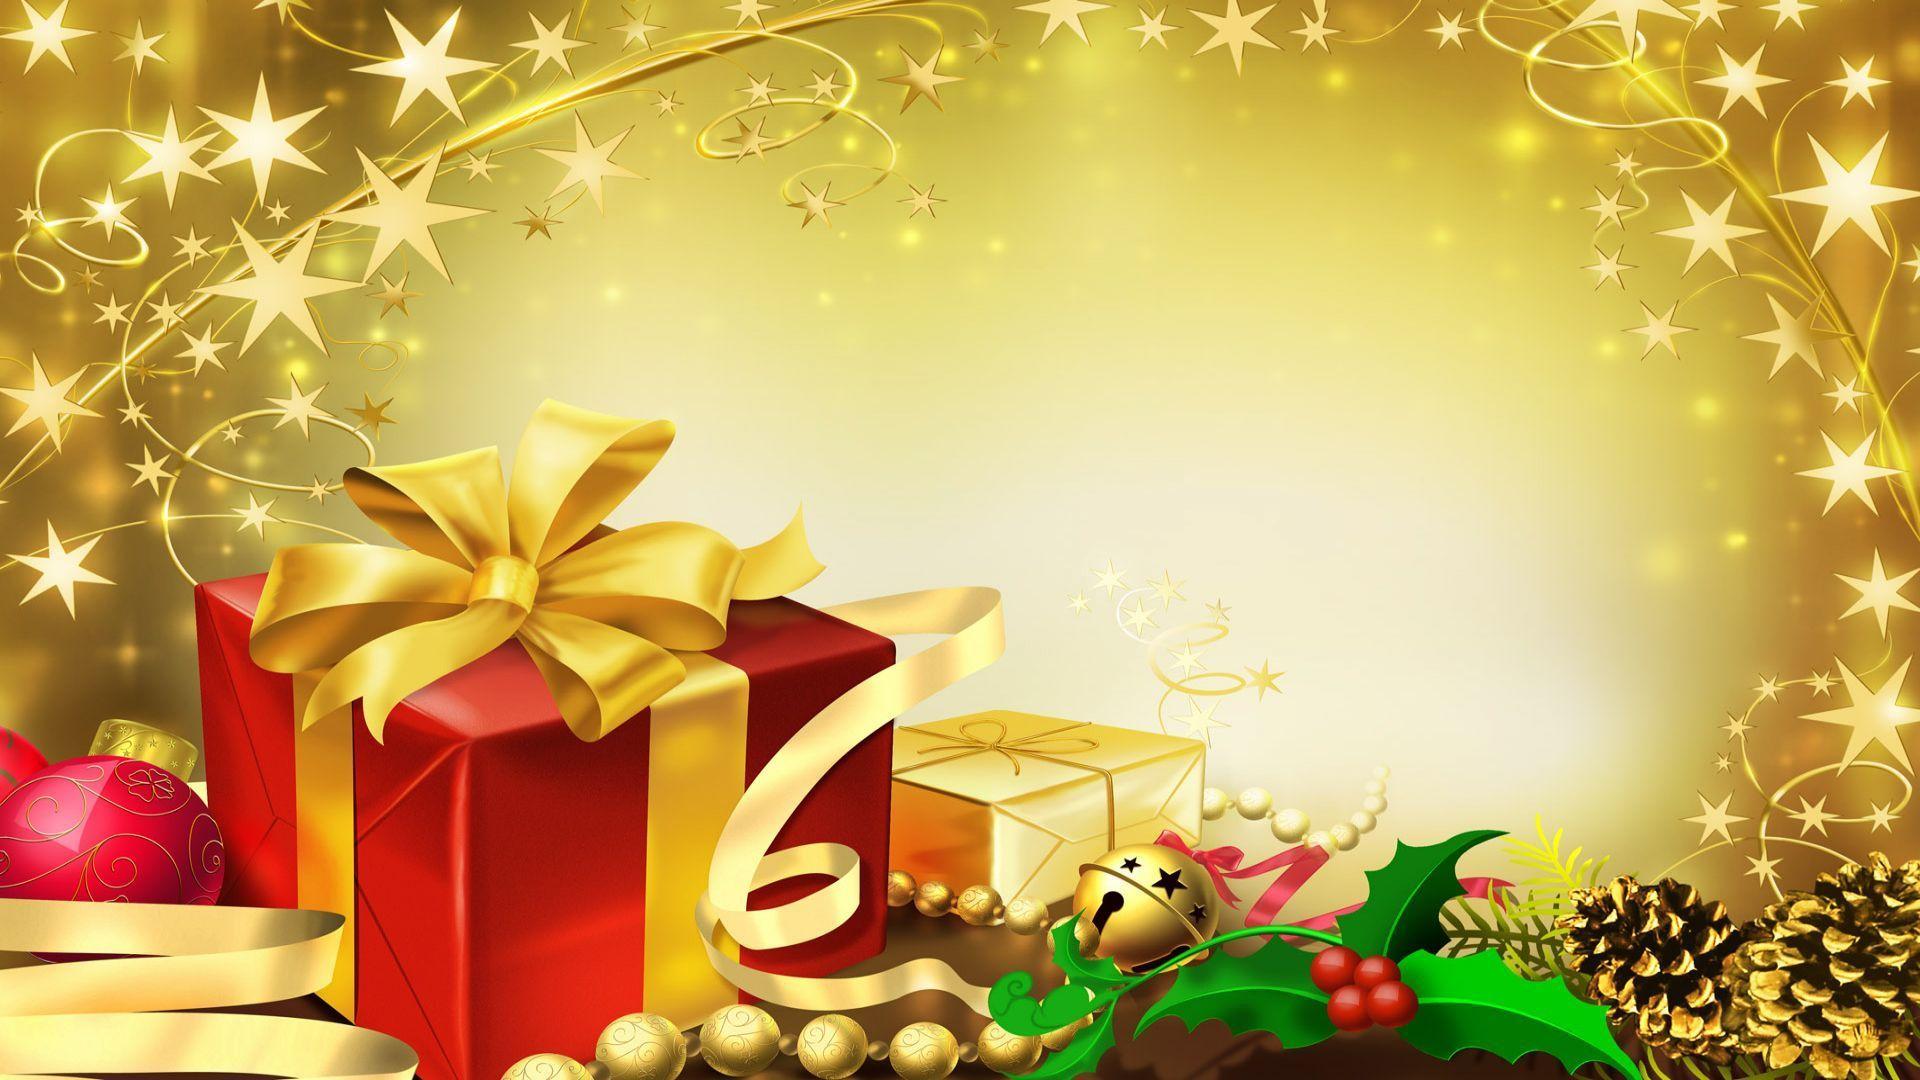 Christmas Holiday Background Image Image & Picture